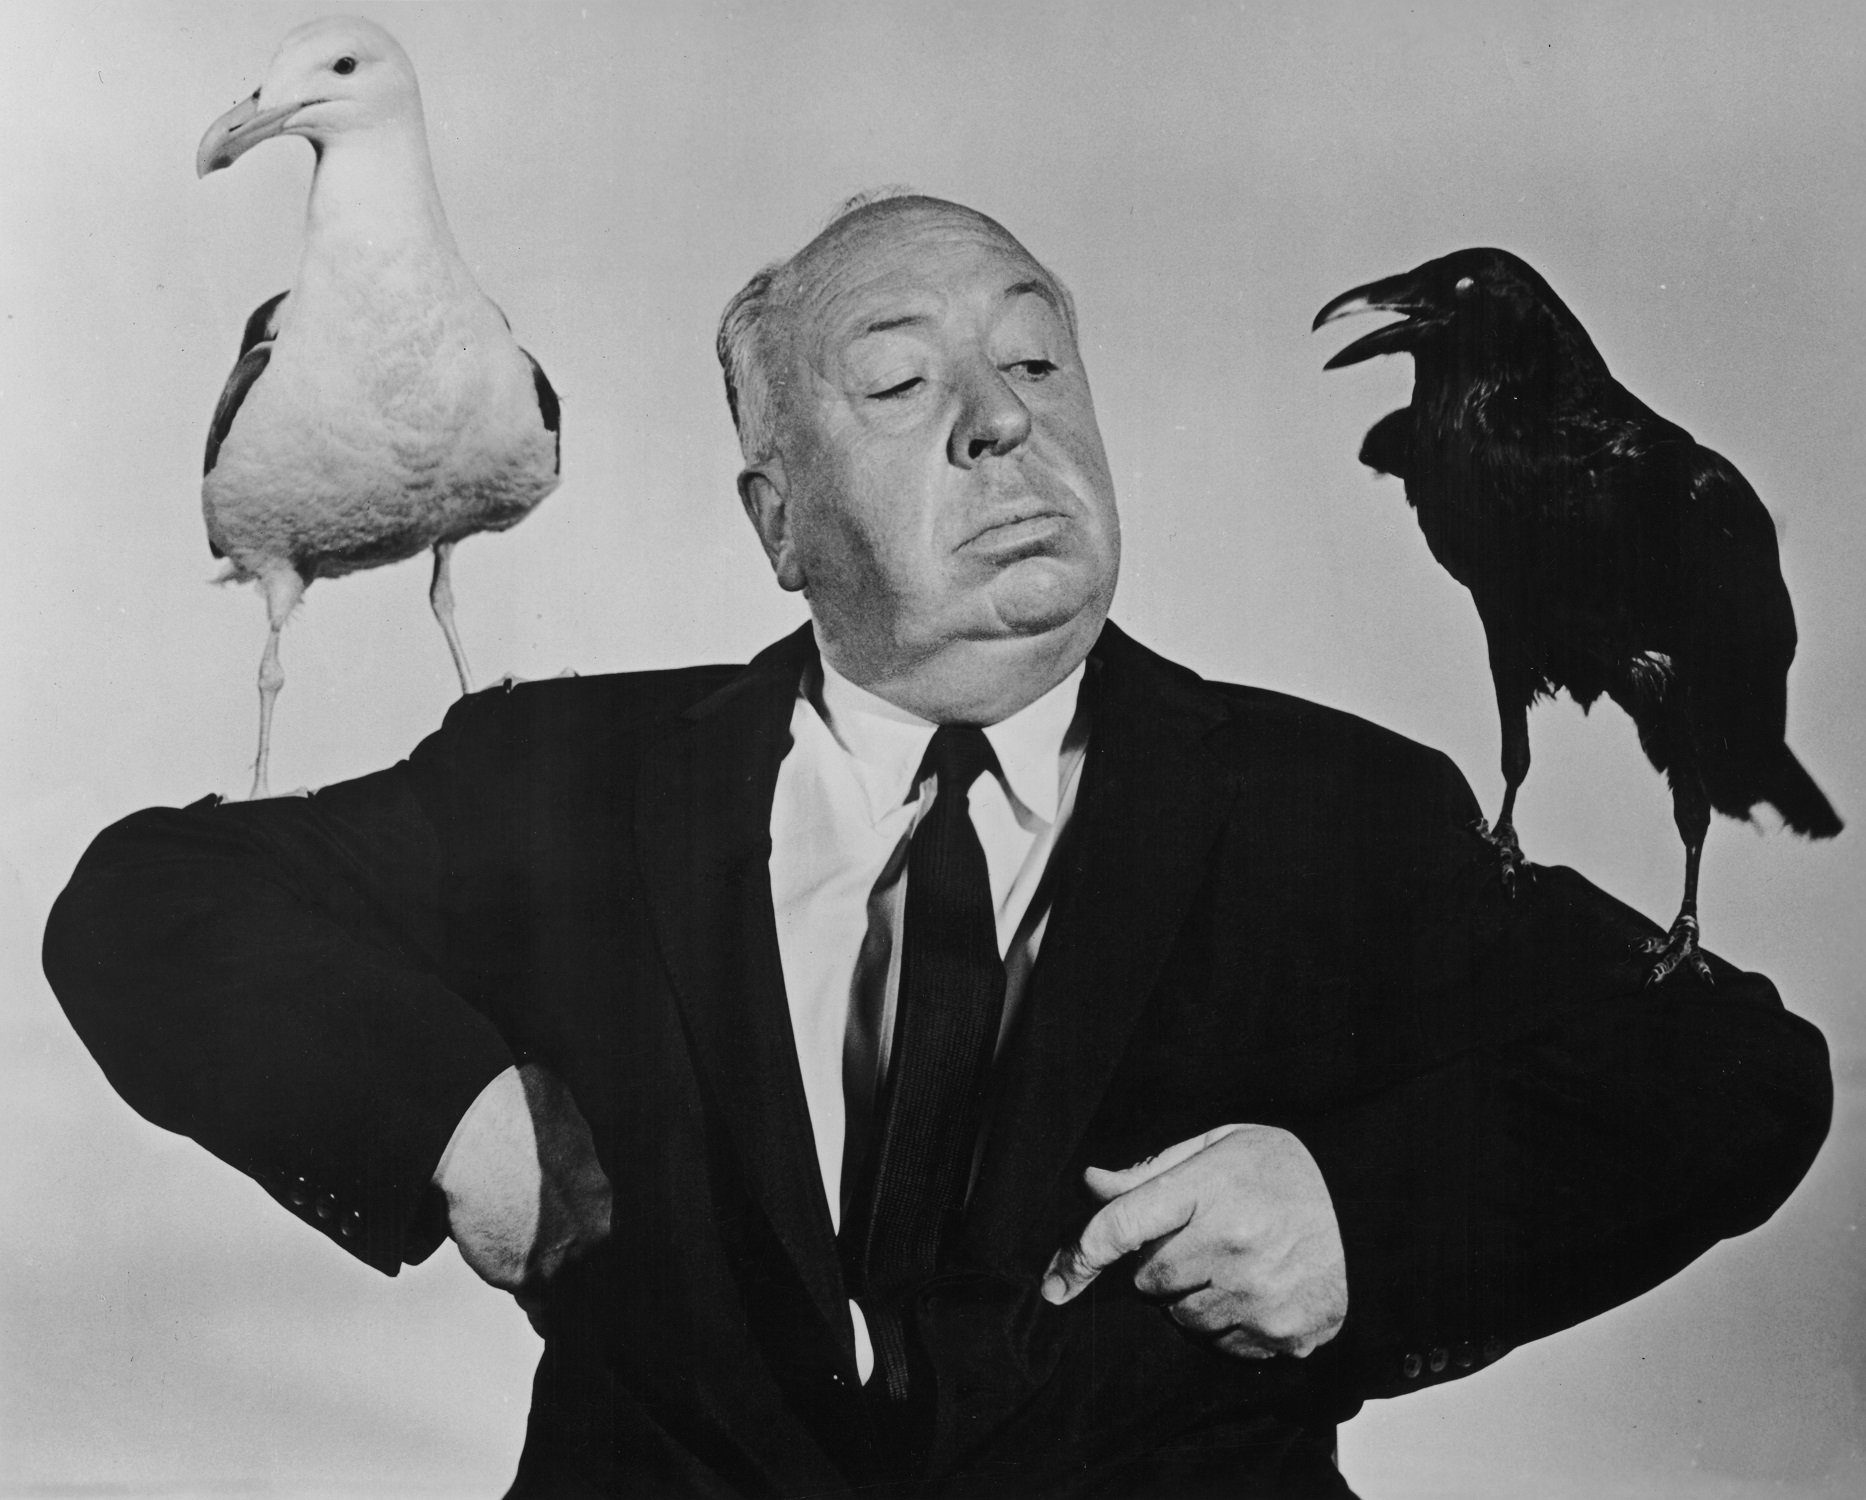 Alfred Hitchcock poses for a promotional still for 'The Birds' in 1963